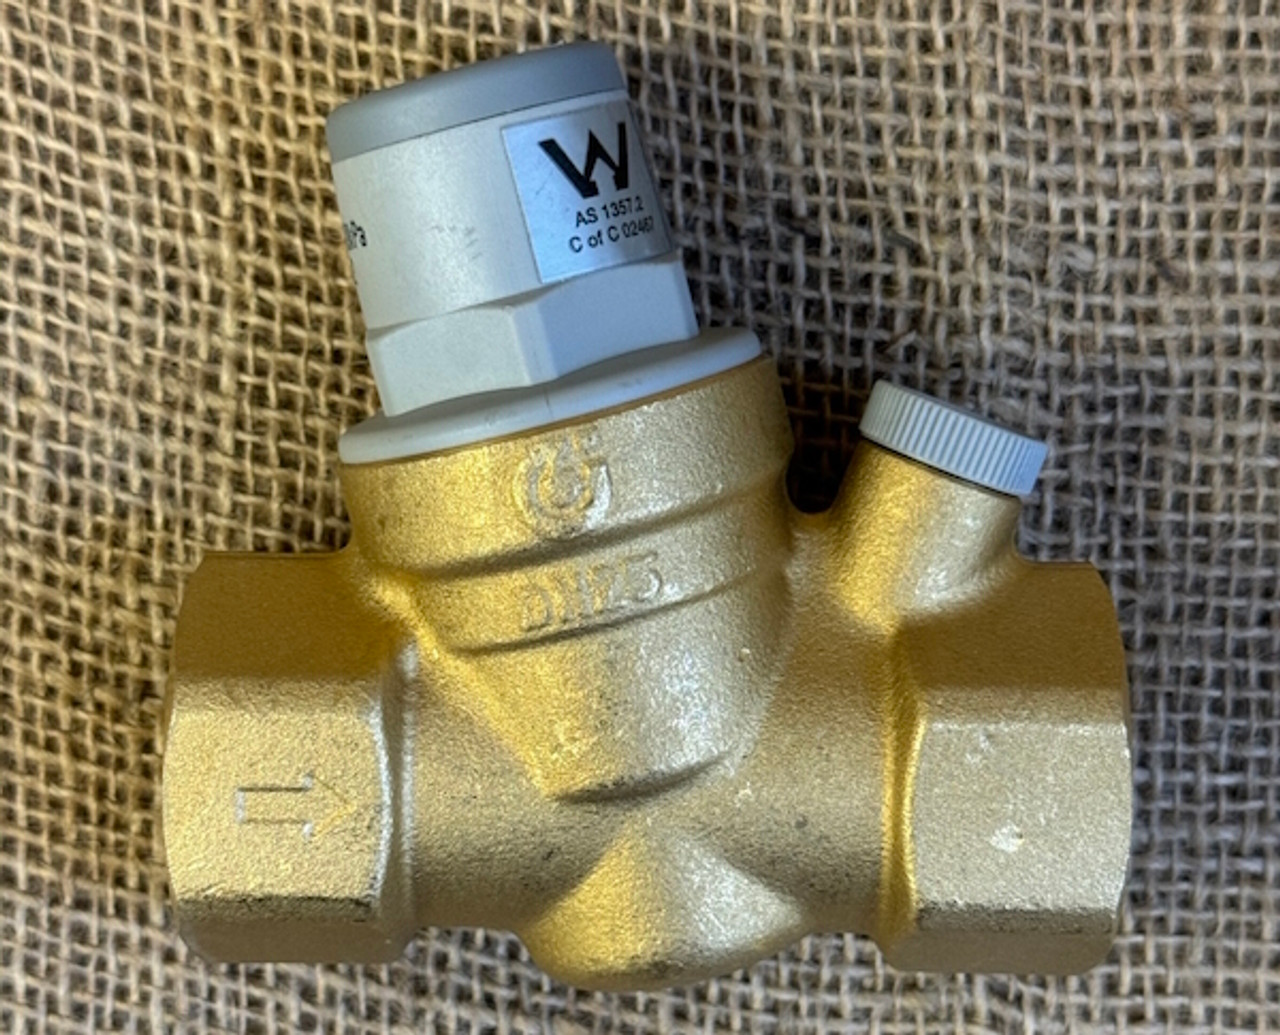 25mm brass Caleffi pressure reducing valve 2,000 kPa down to 100-600 kPa and it is adjustable and works with no-flow.